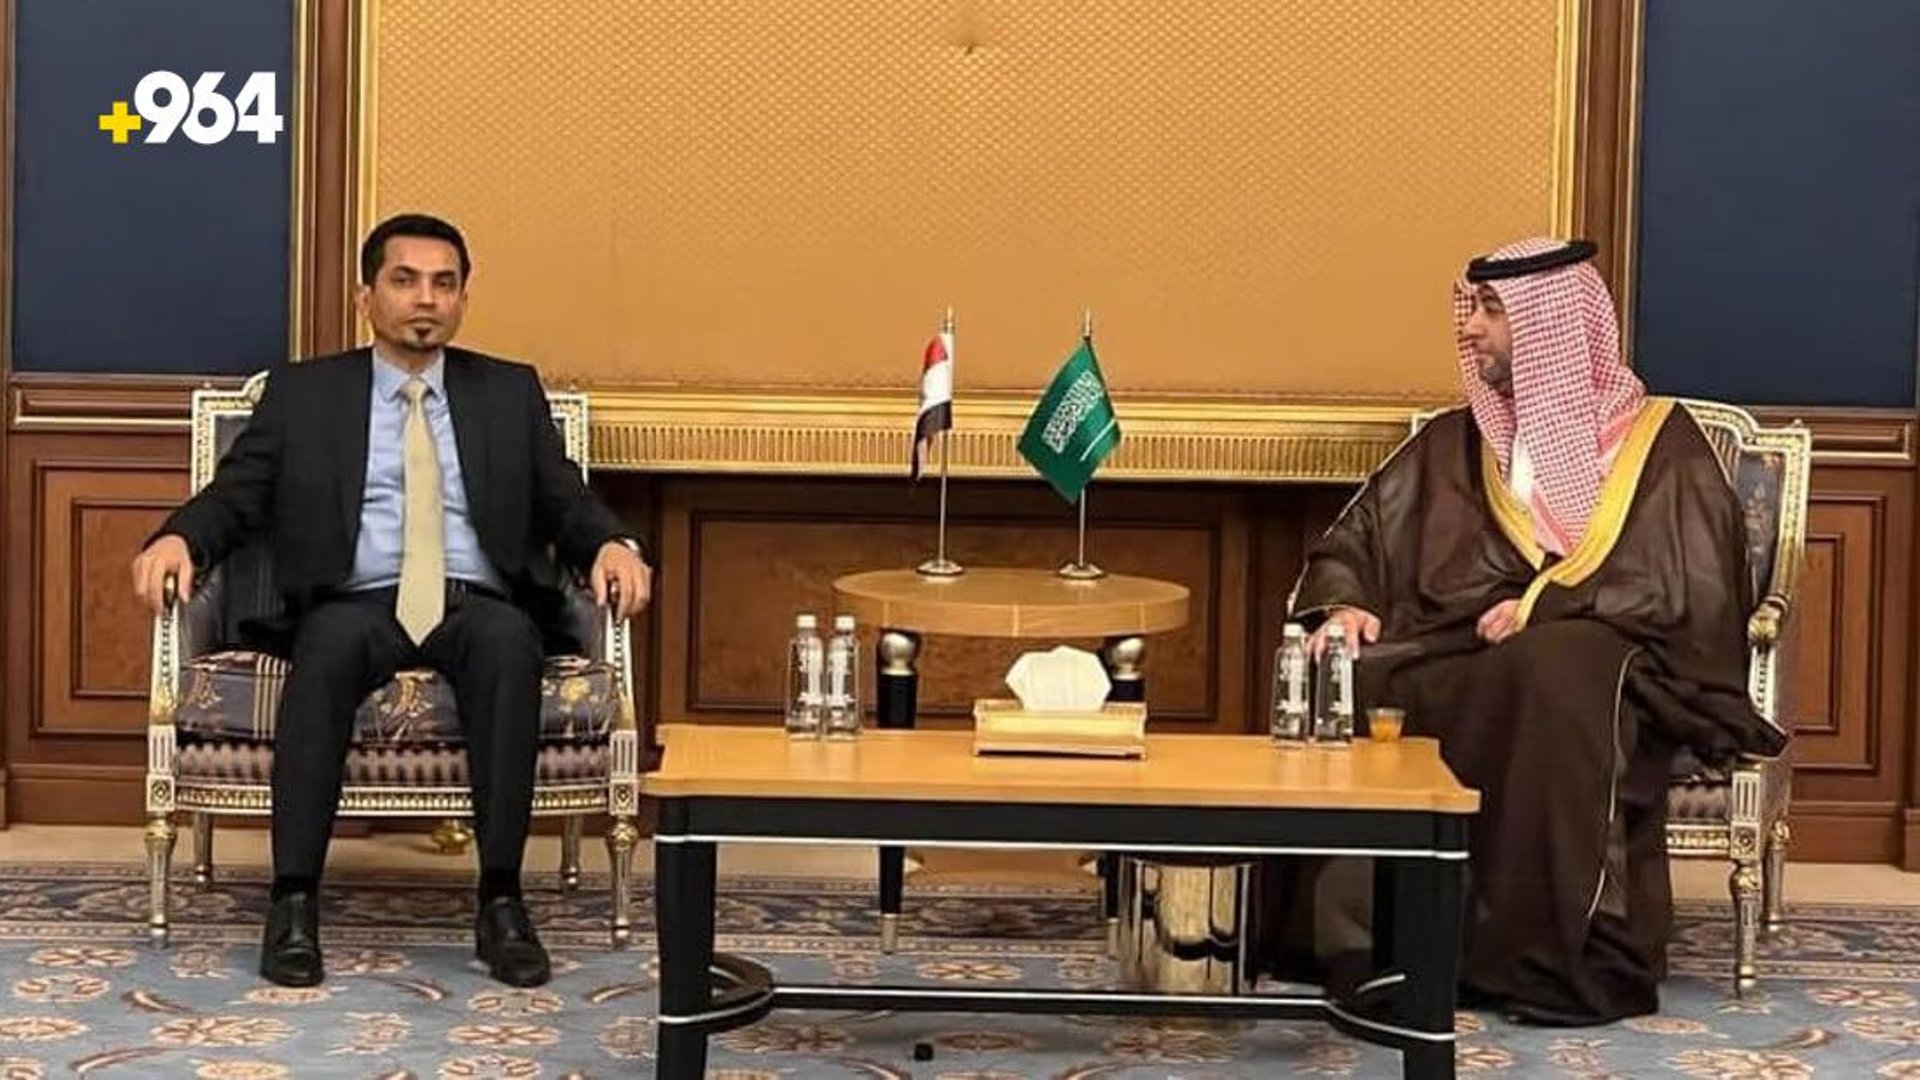 Iraqi minister of transport and Saudi CEO discuss port cooperation